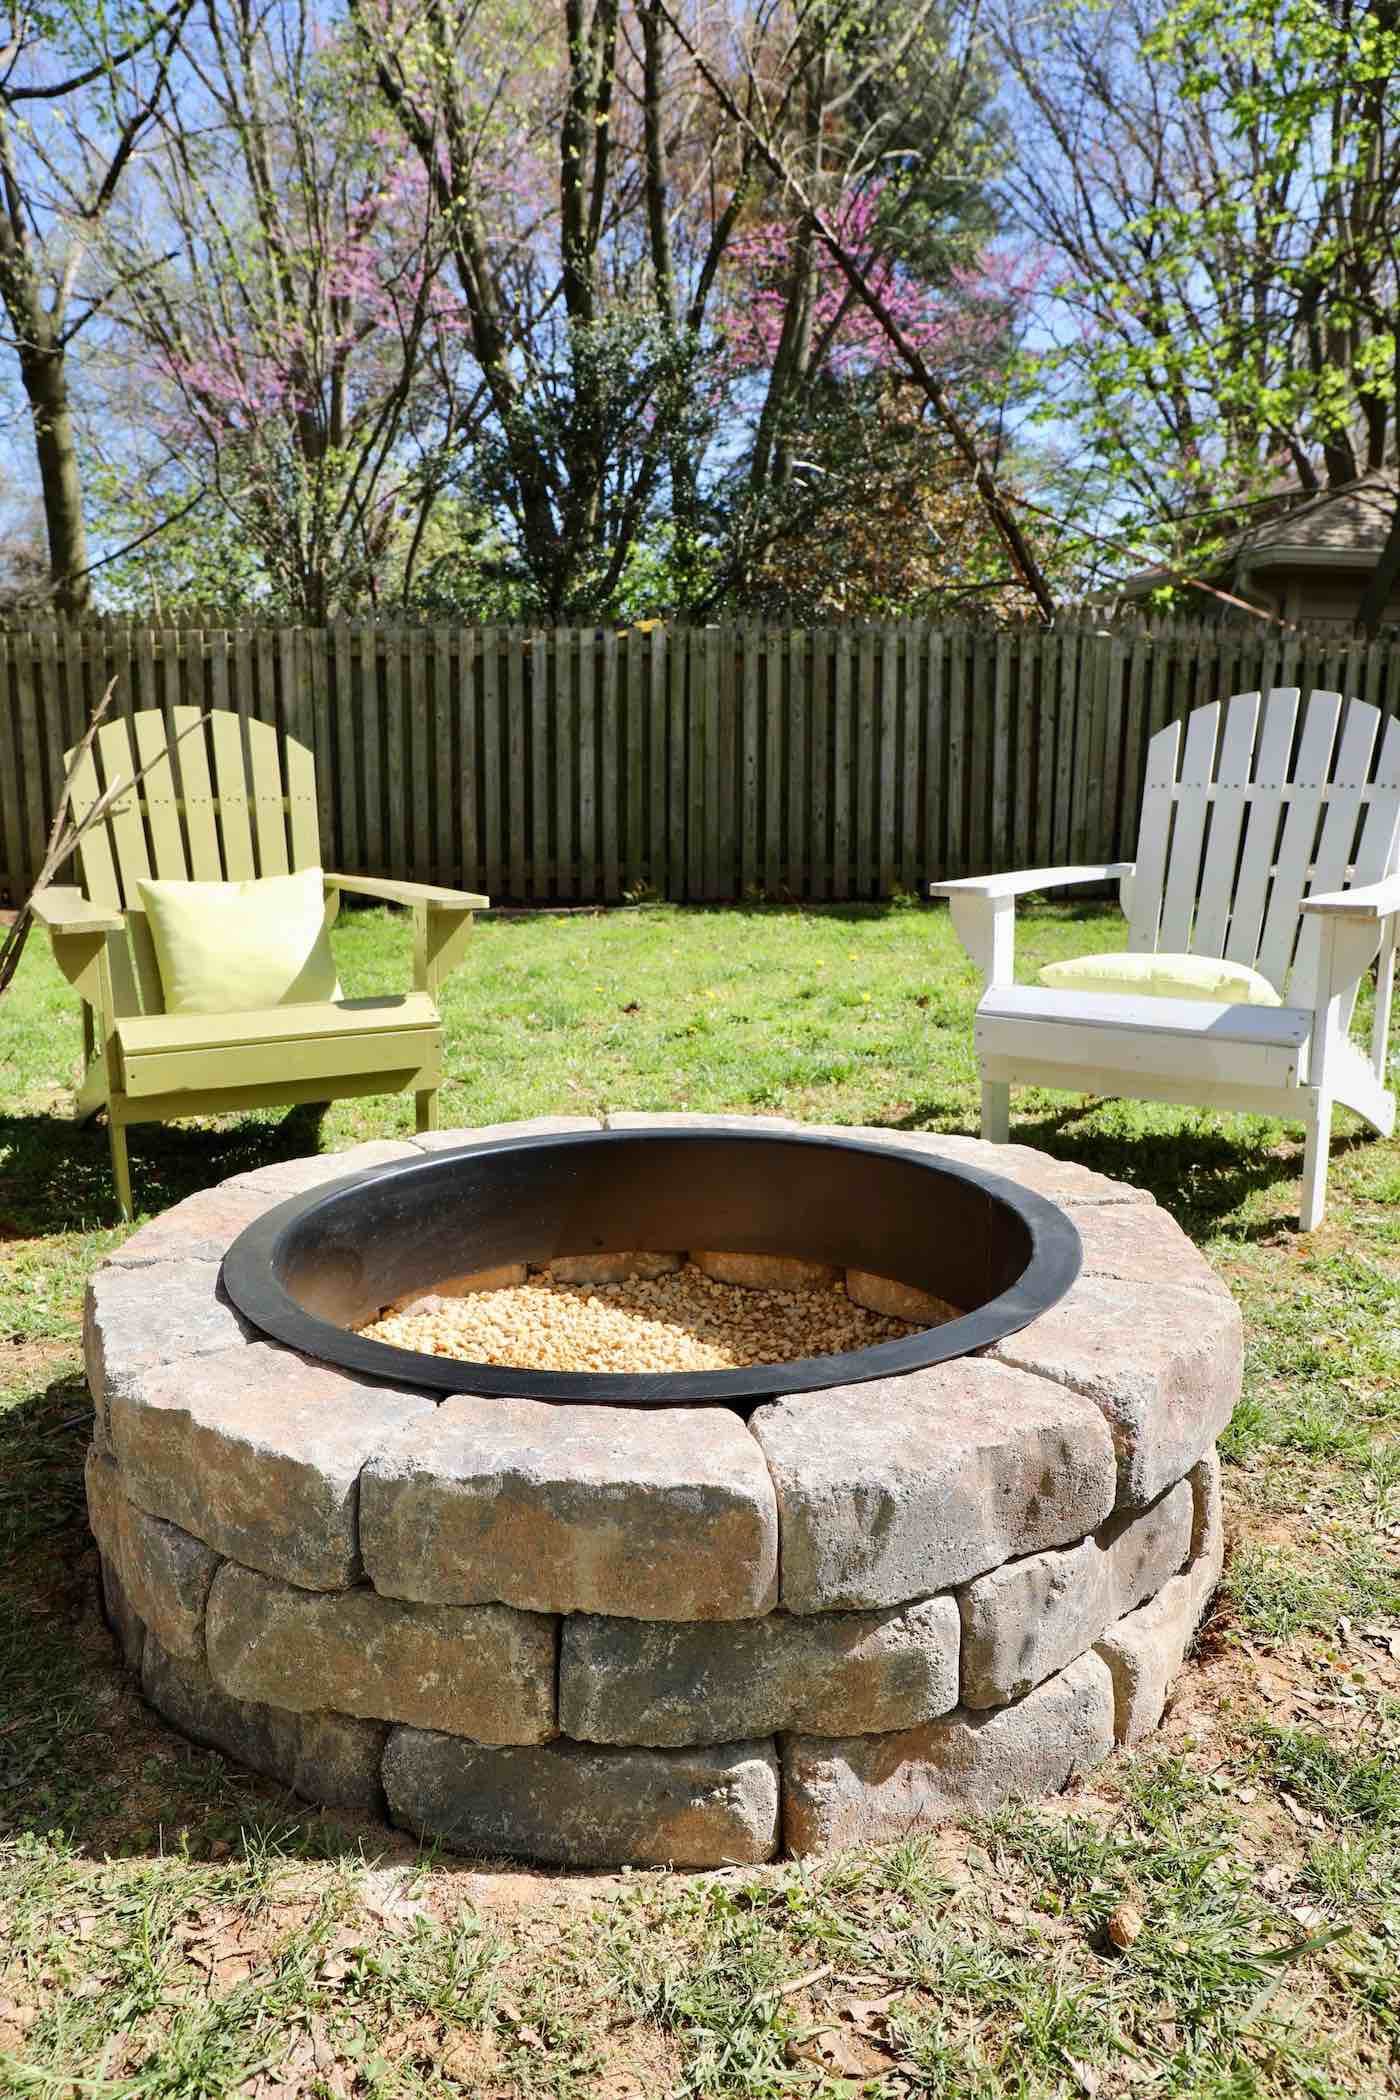 Building A Backyard Firepit
 How to Build a Fire Pit in Your Backyard I Used a Fire